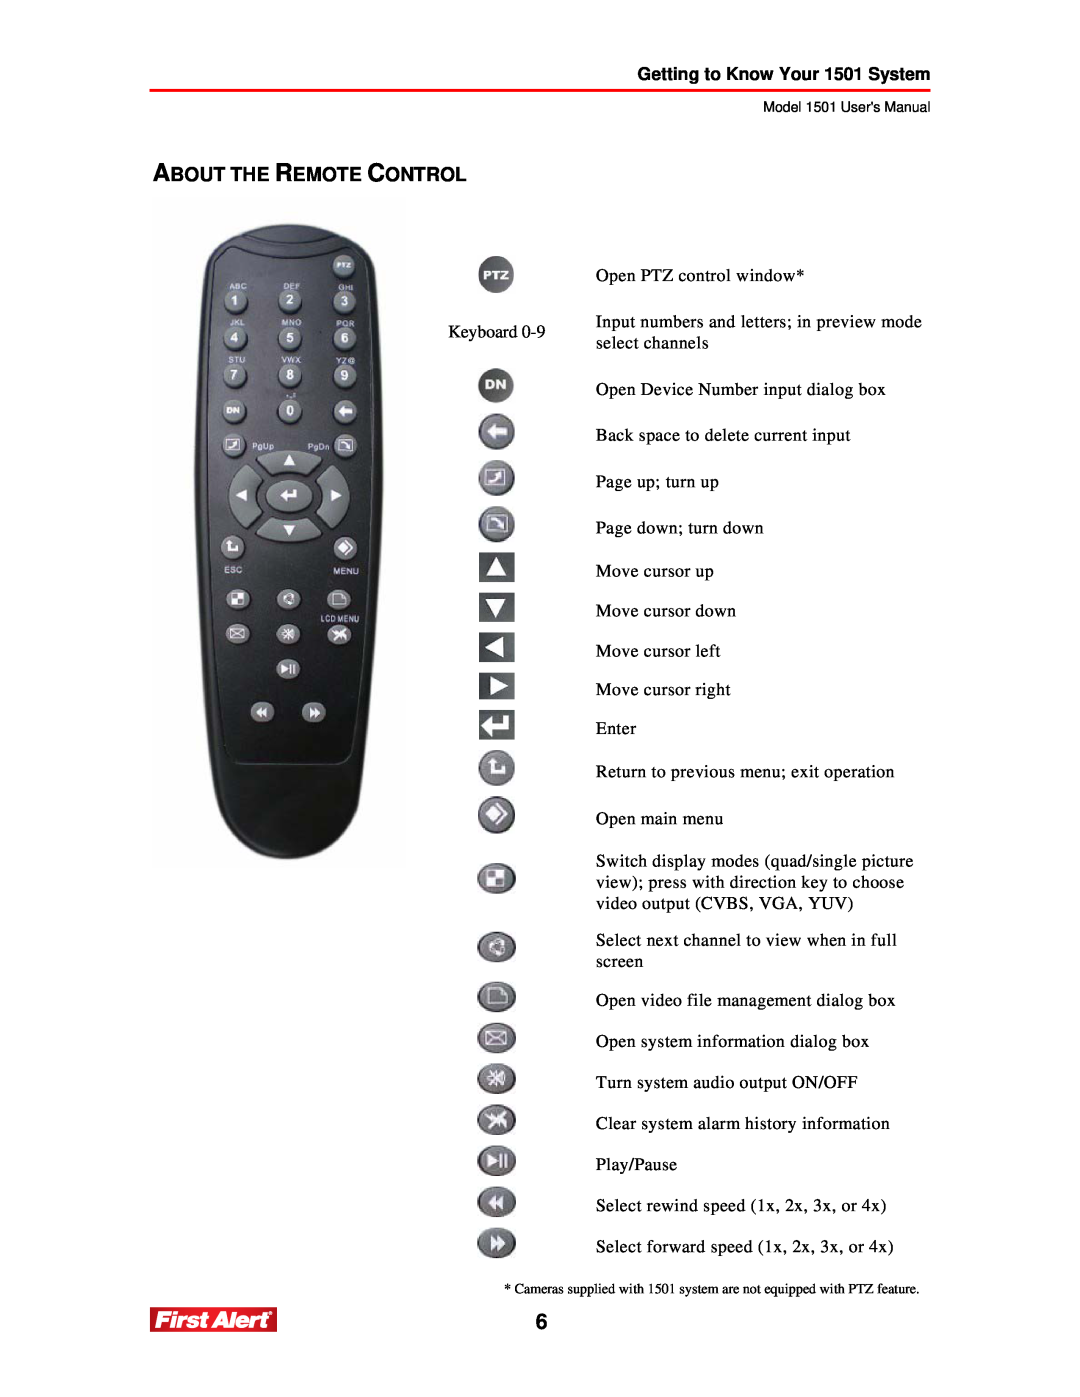 First Alert user manual About The Remote Control, Getting to Know Your 1501 System 